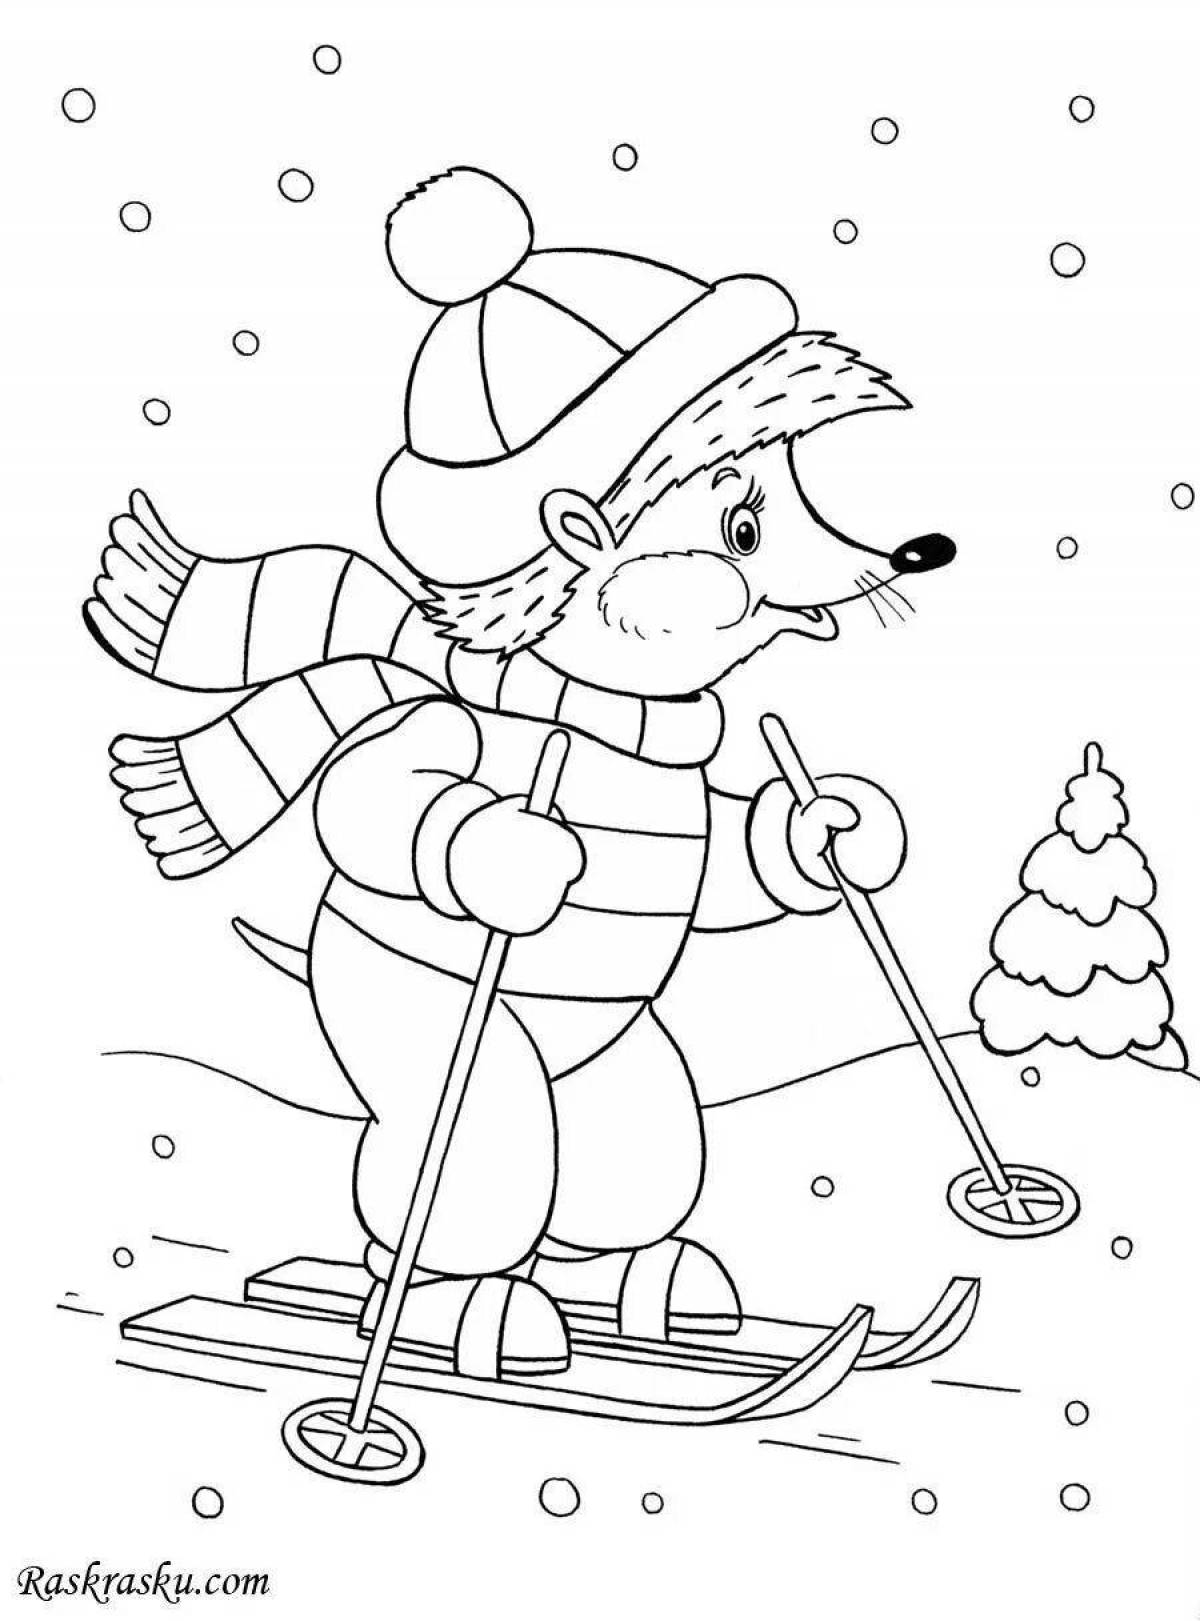 Vibrant winter coloring book for kids